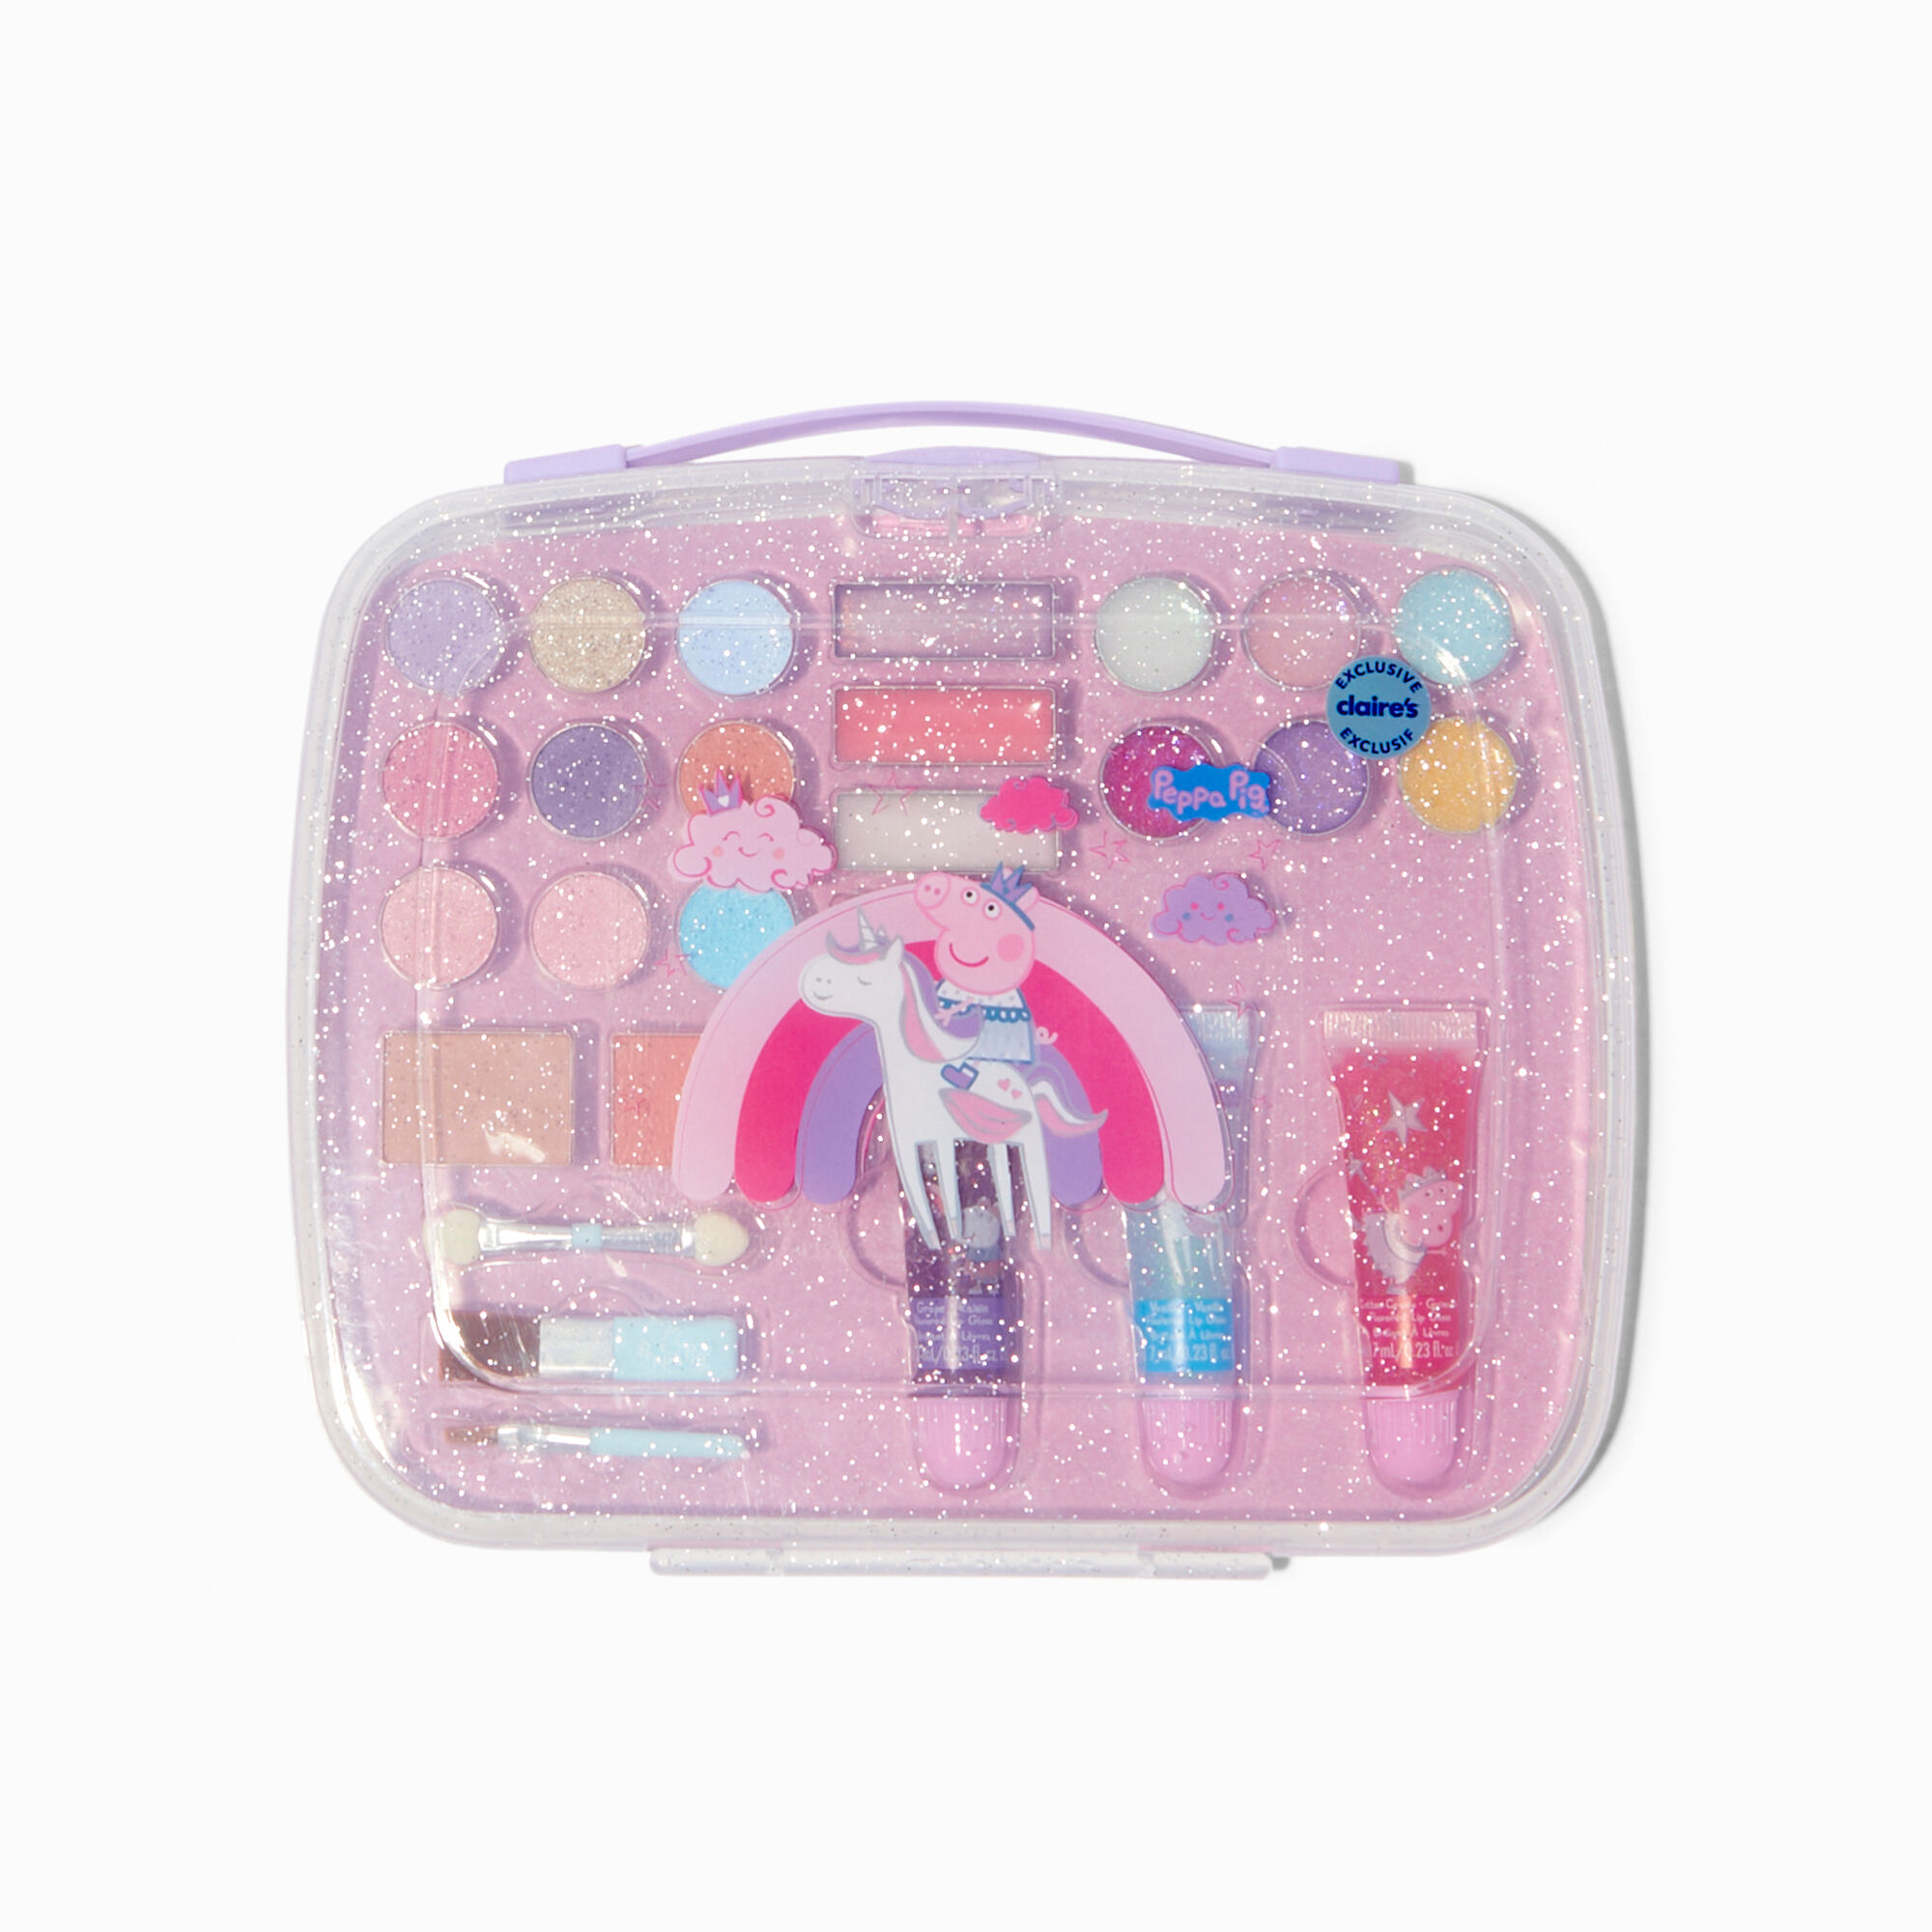 View Claires Peppa Pig Glitter Makeup Set Pink information